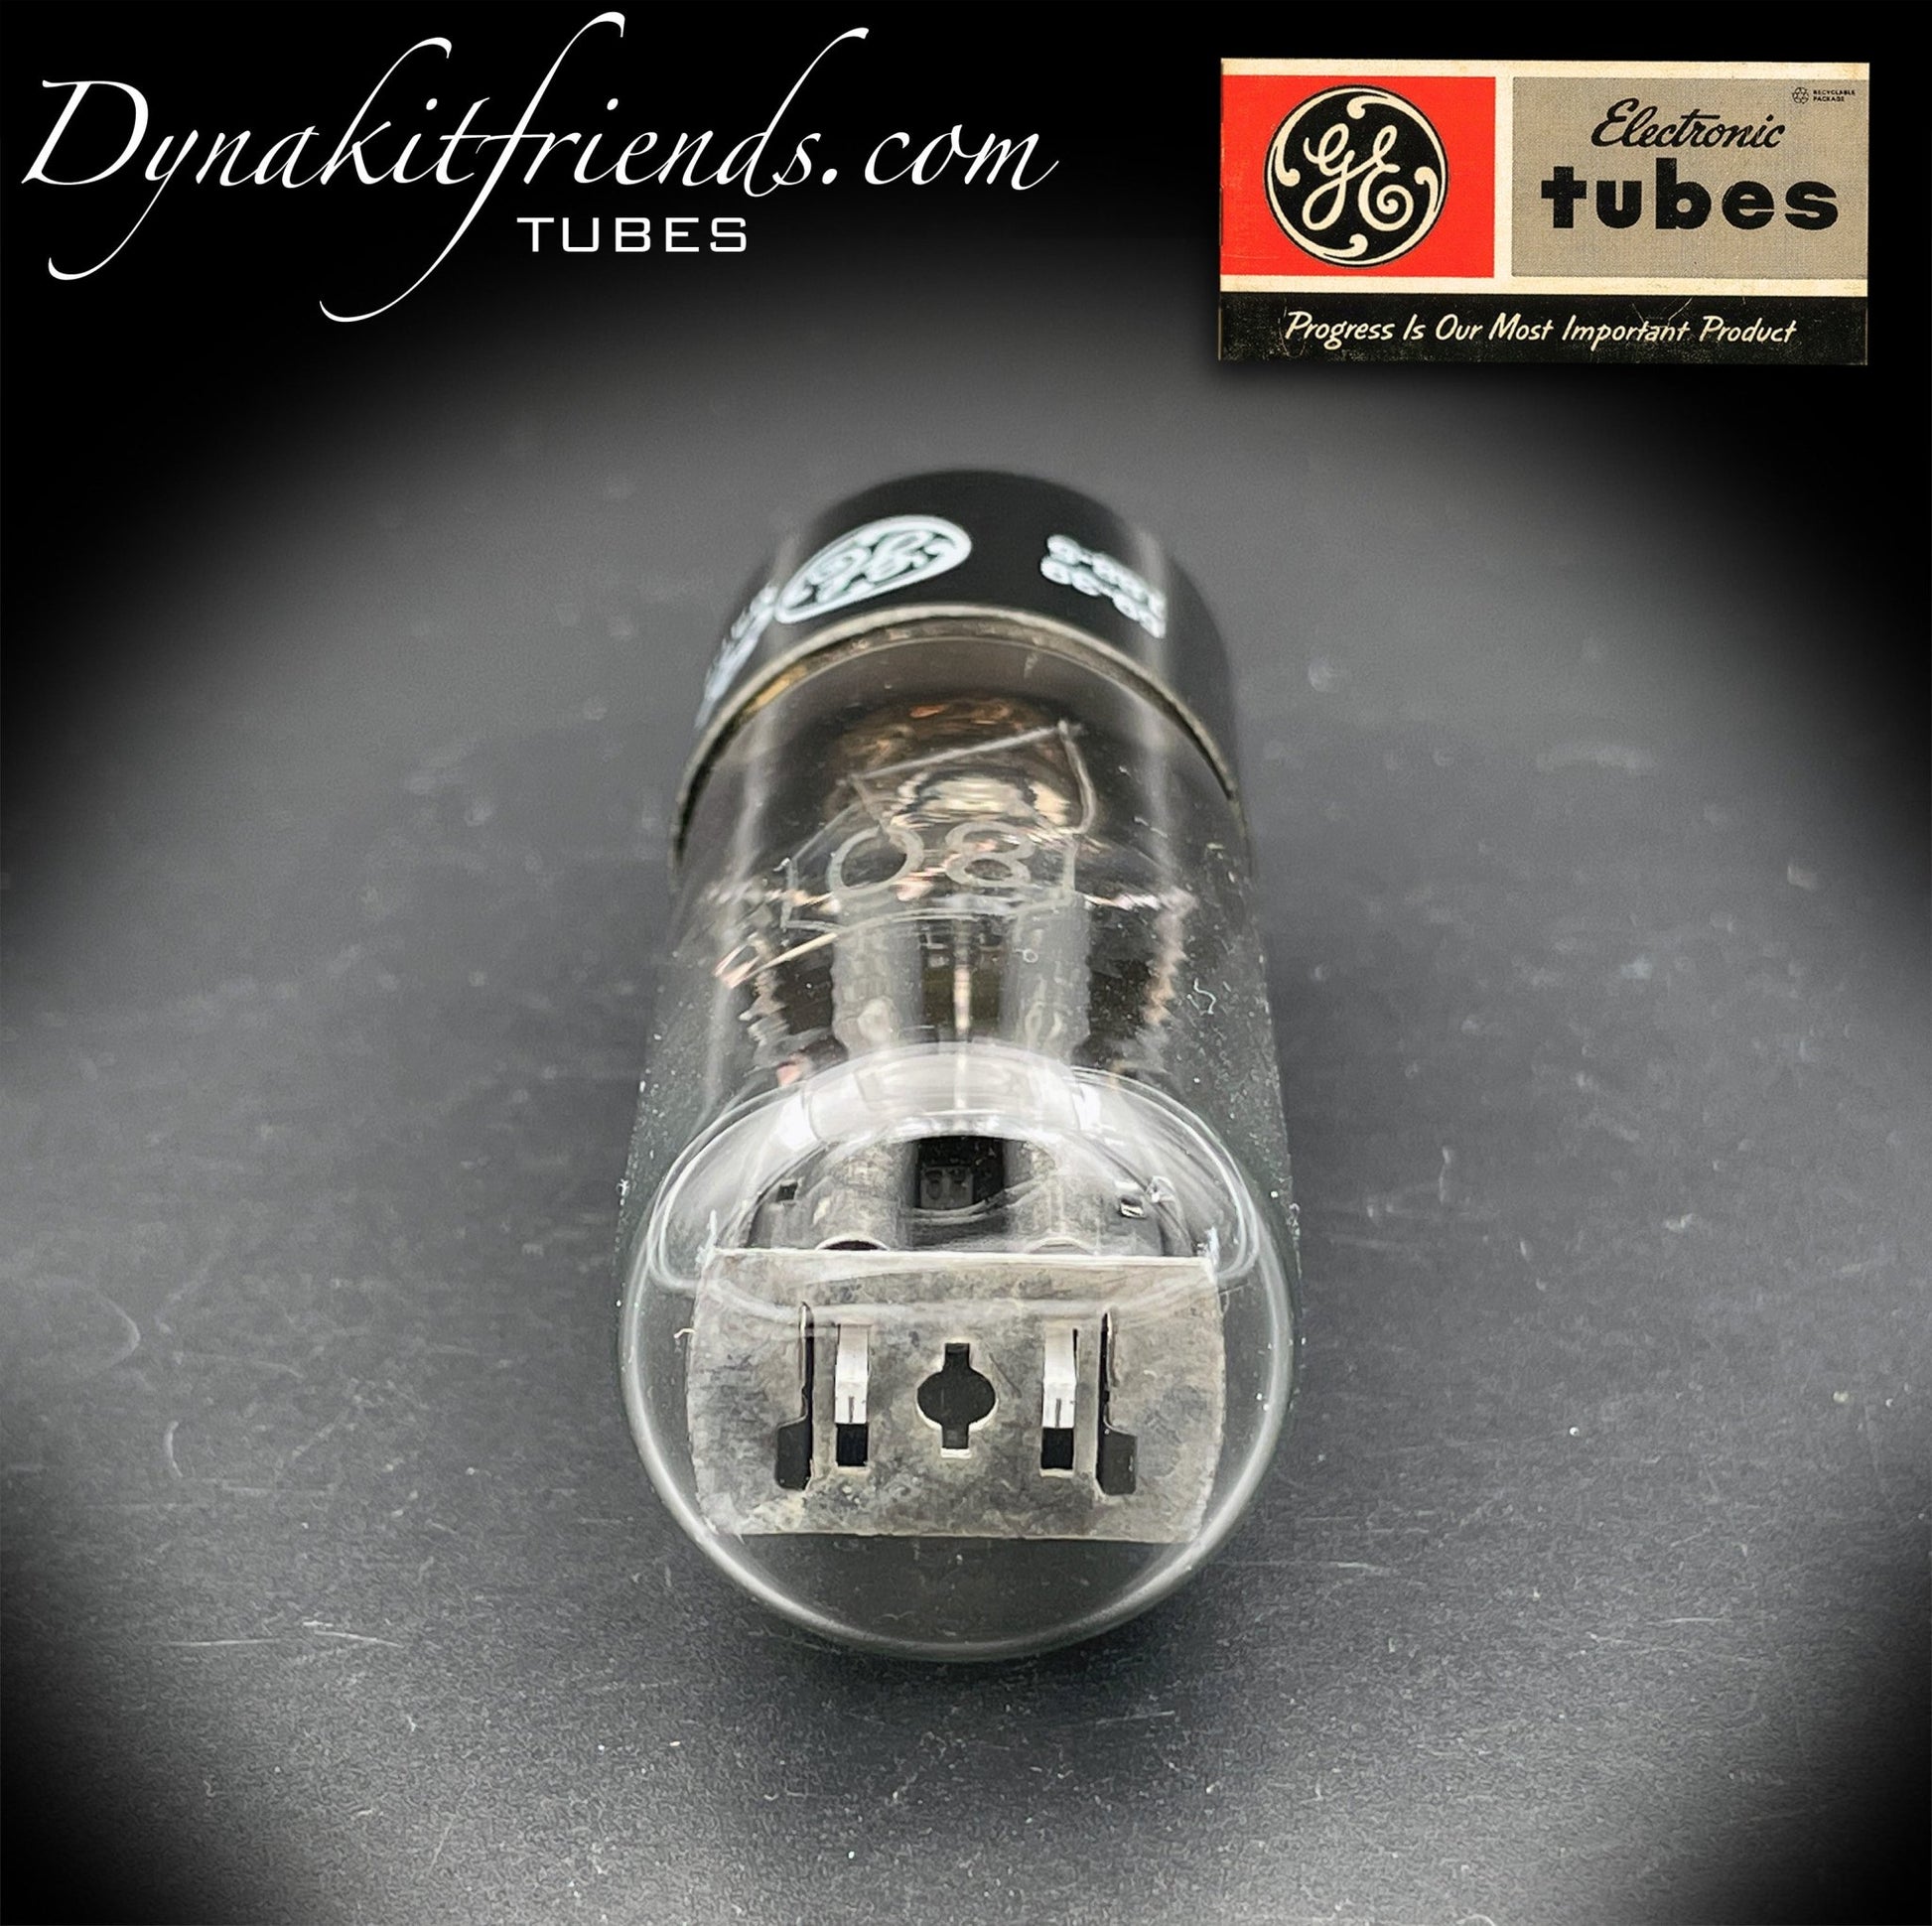 80 ( 110E/59 ) GE NOS Black Plates [] Getter Rectifier Tube Made in USA - Vacuum Tubes Treasures